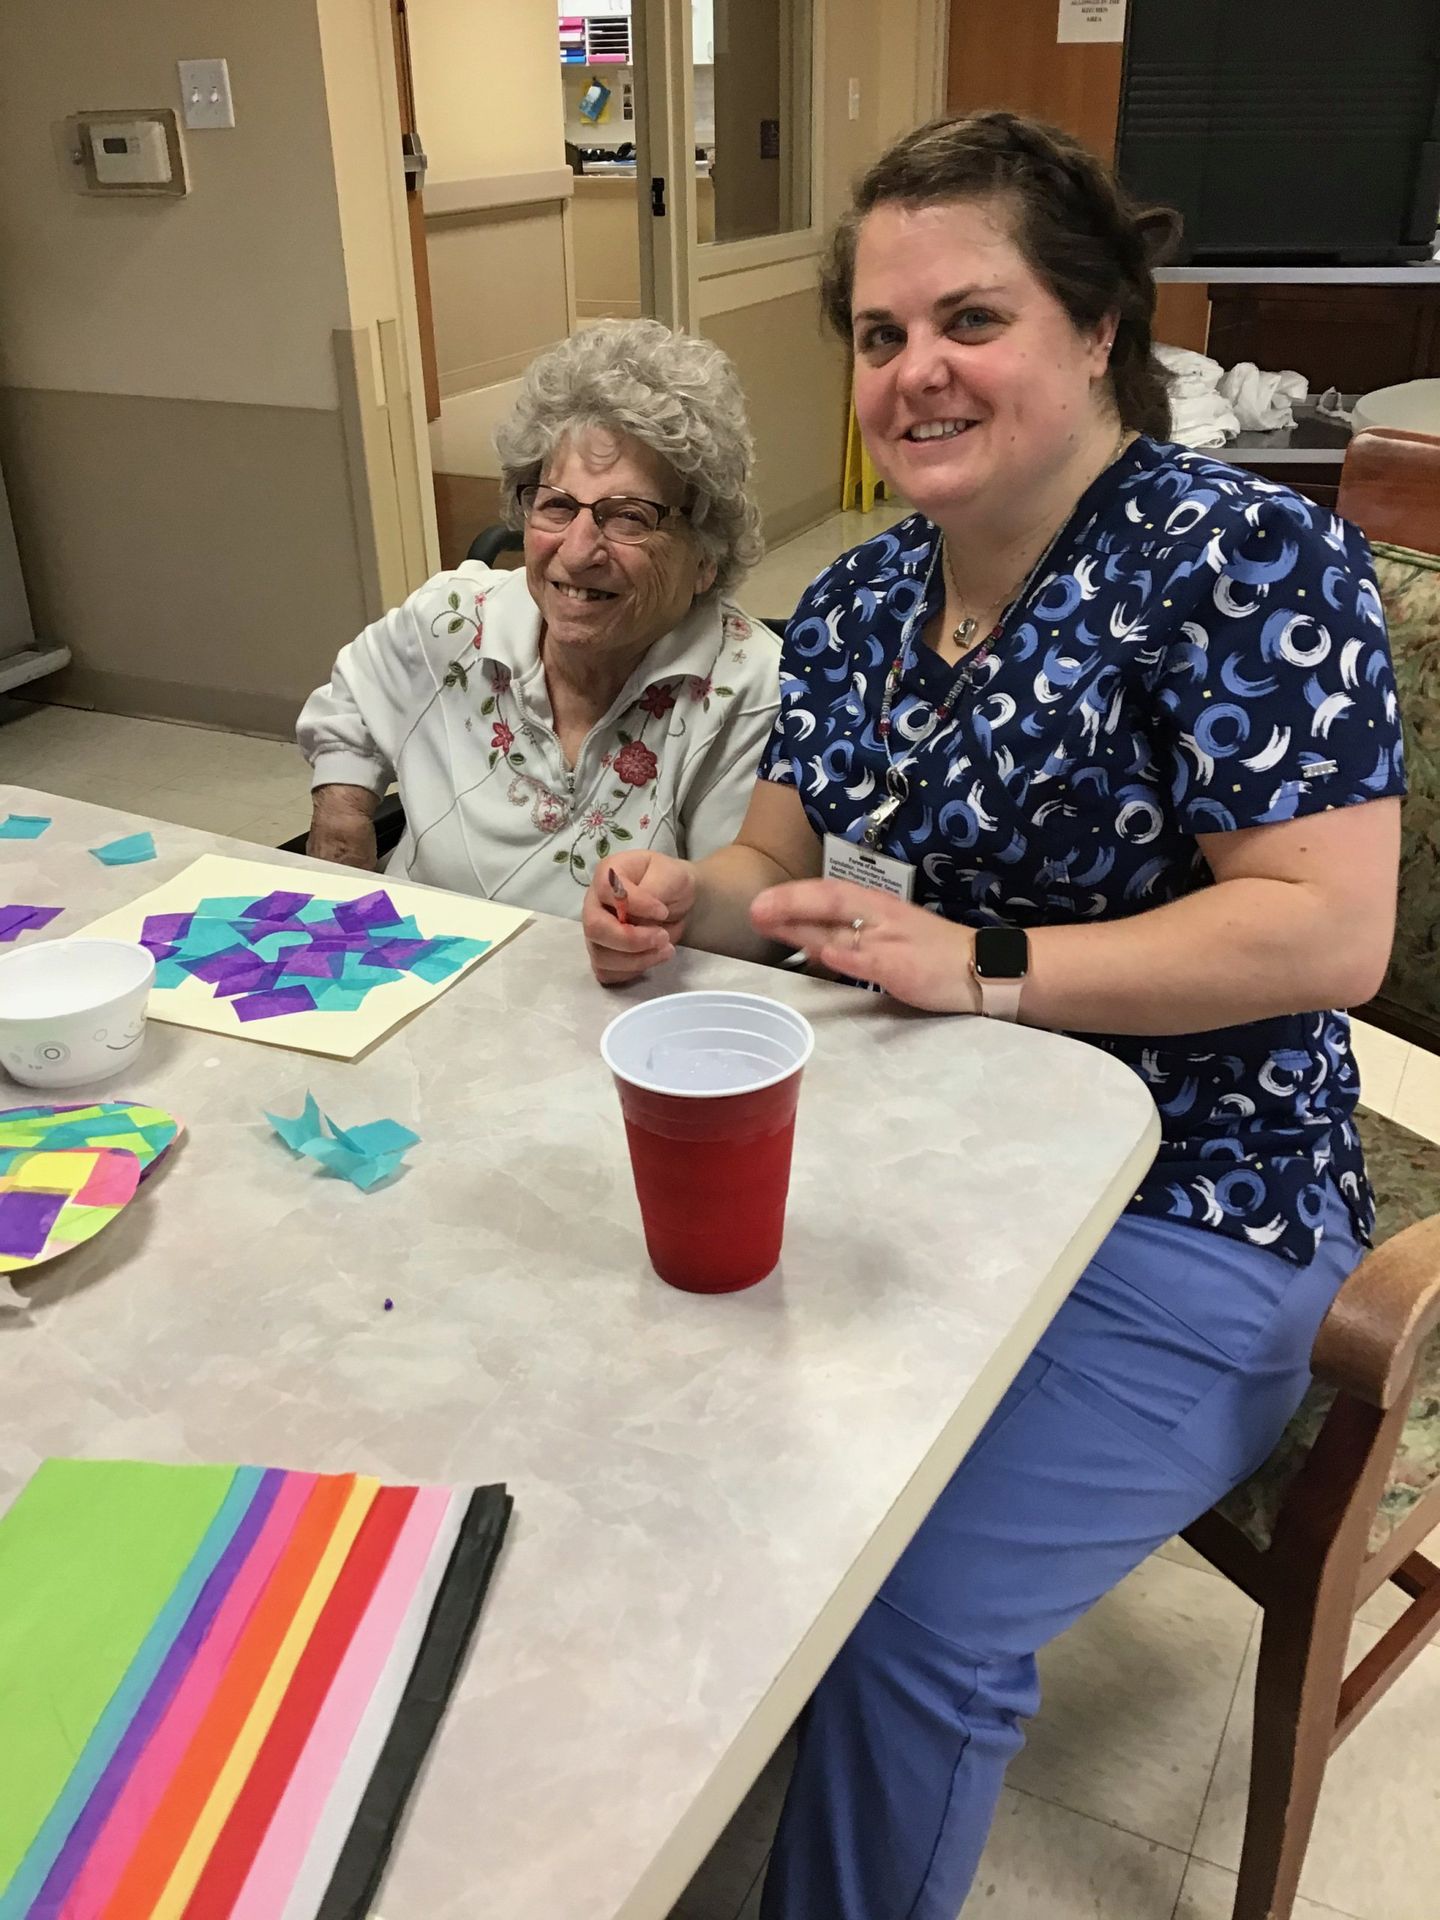 Elder and staff member doing crafts at Lenawee Medical Care Facility in Adrian, MI